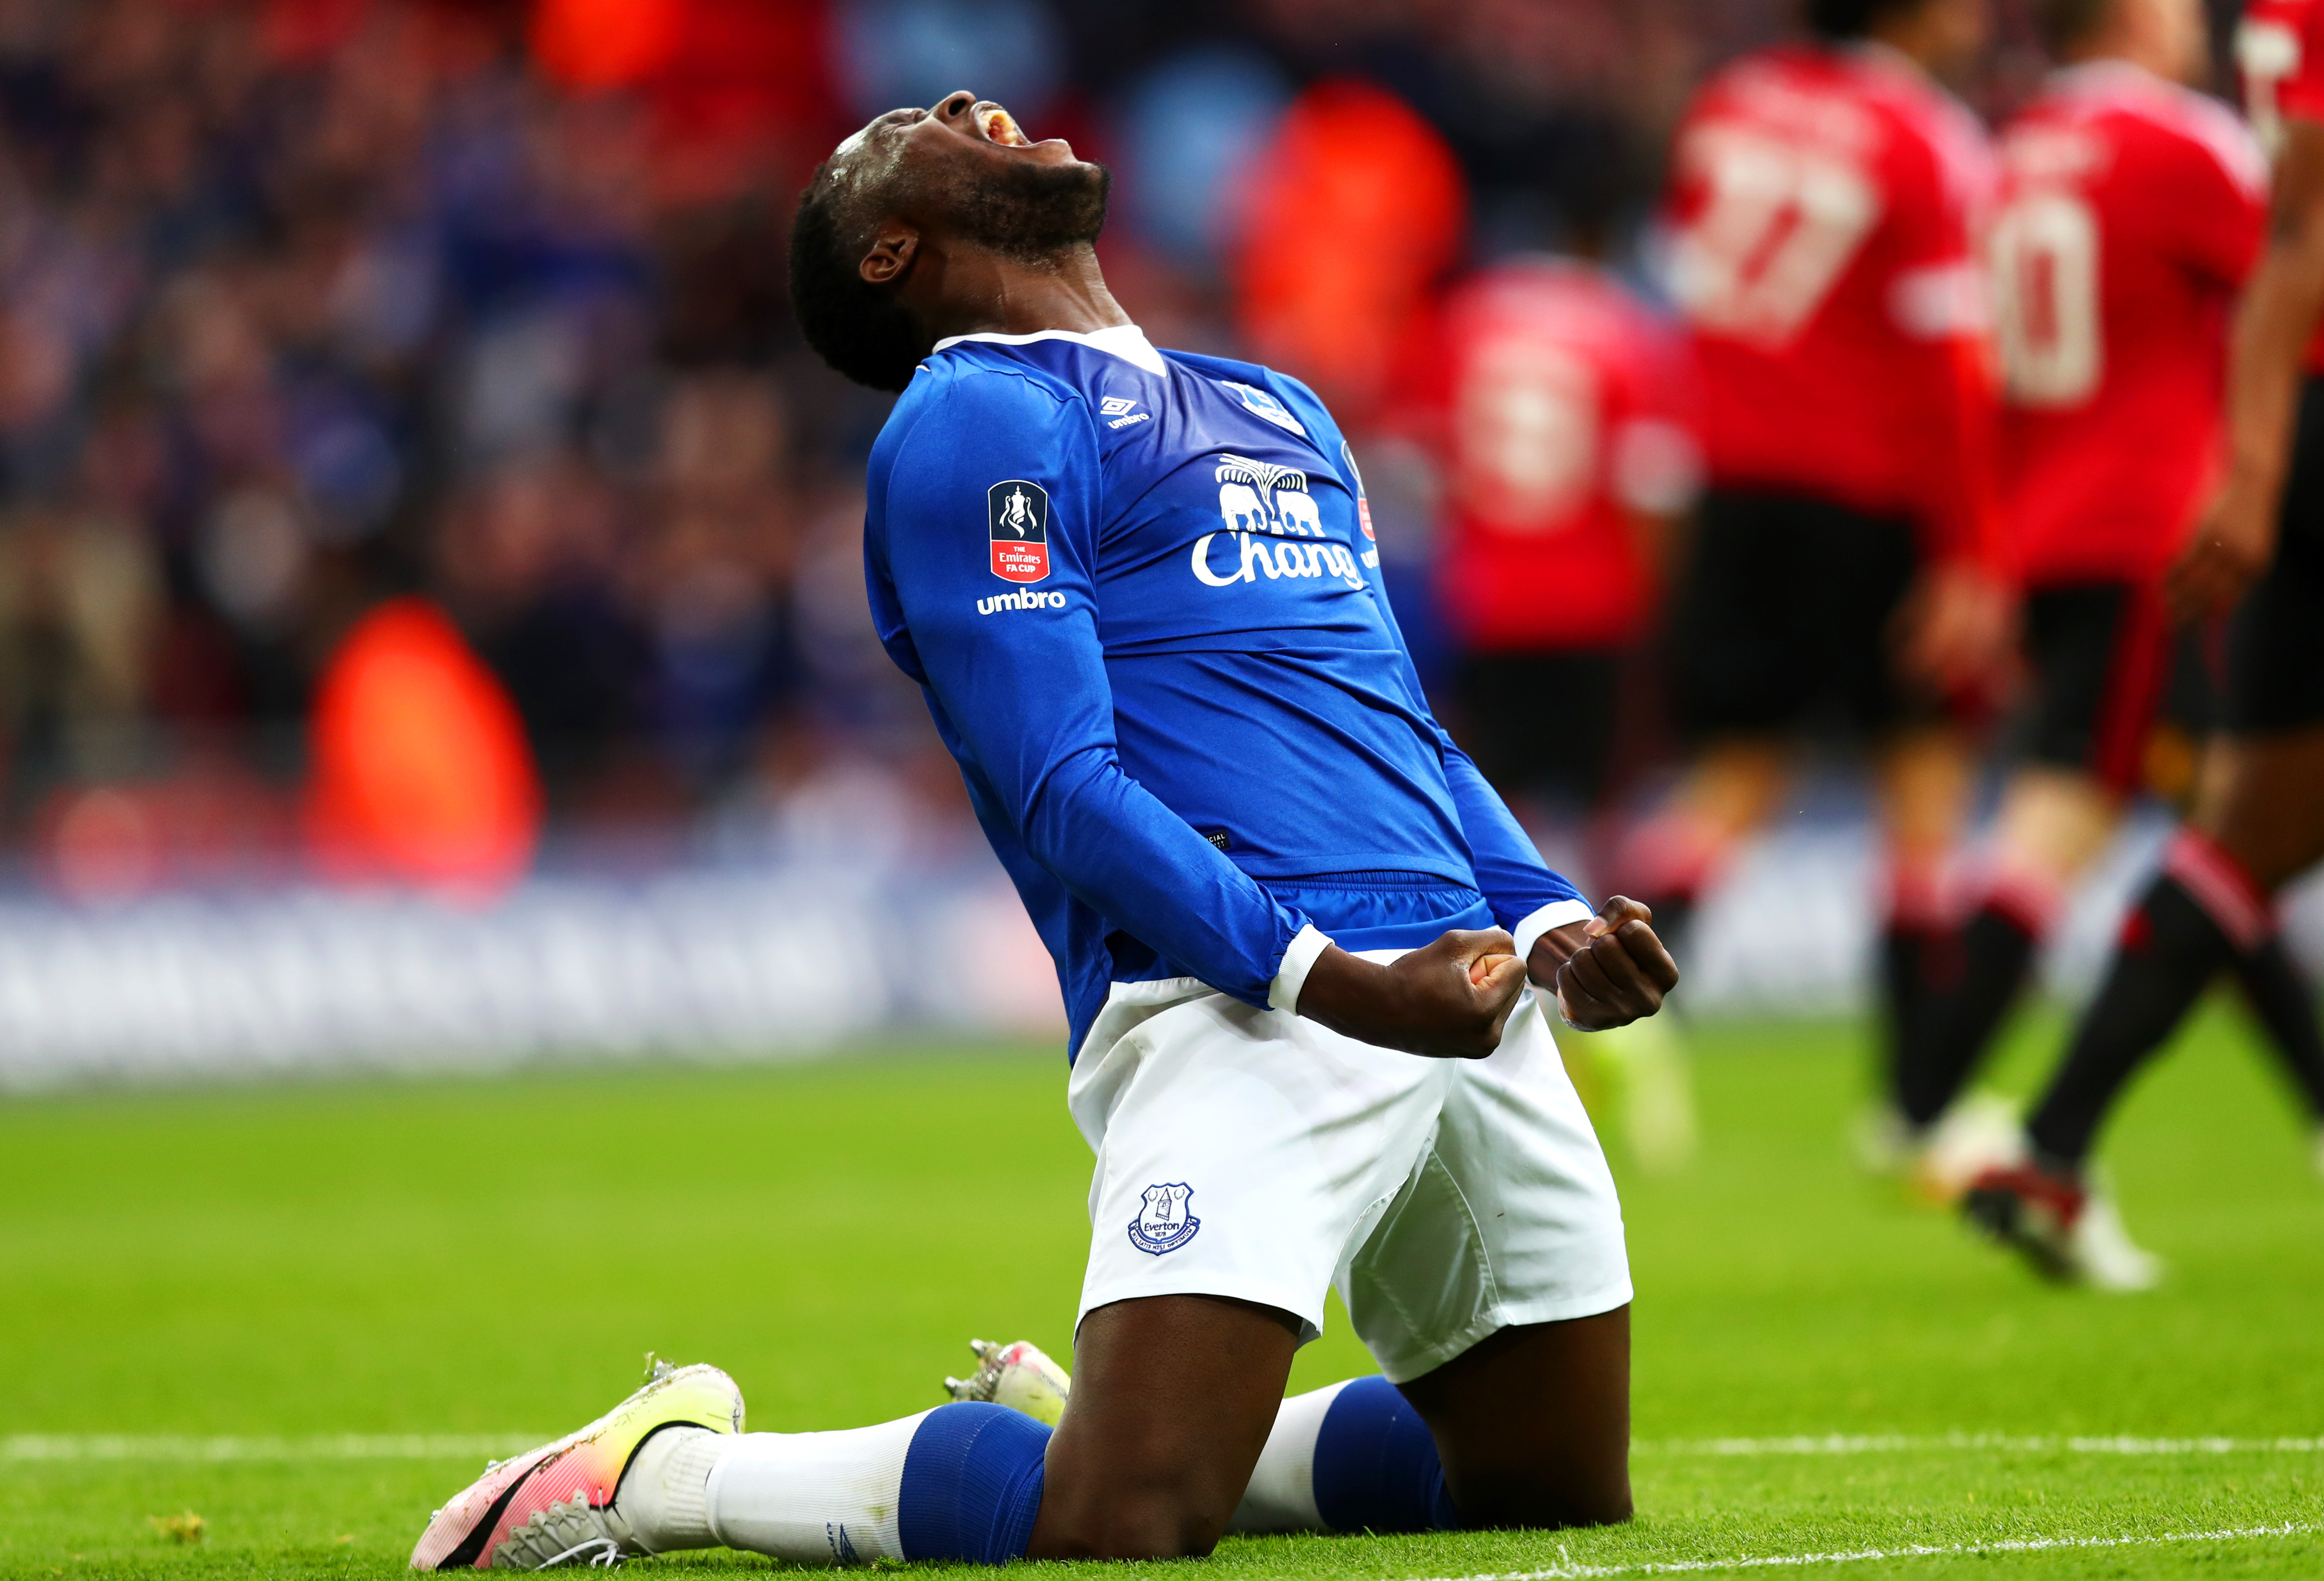 Everton vs Crystal Palace Live Stream: Watch EPL Matches Online5095 x 3466